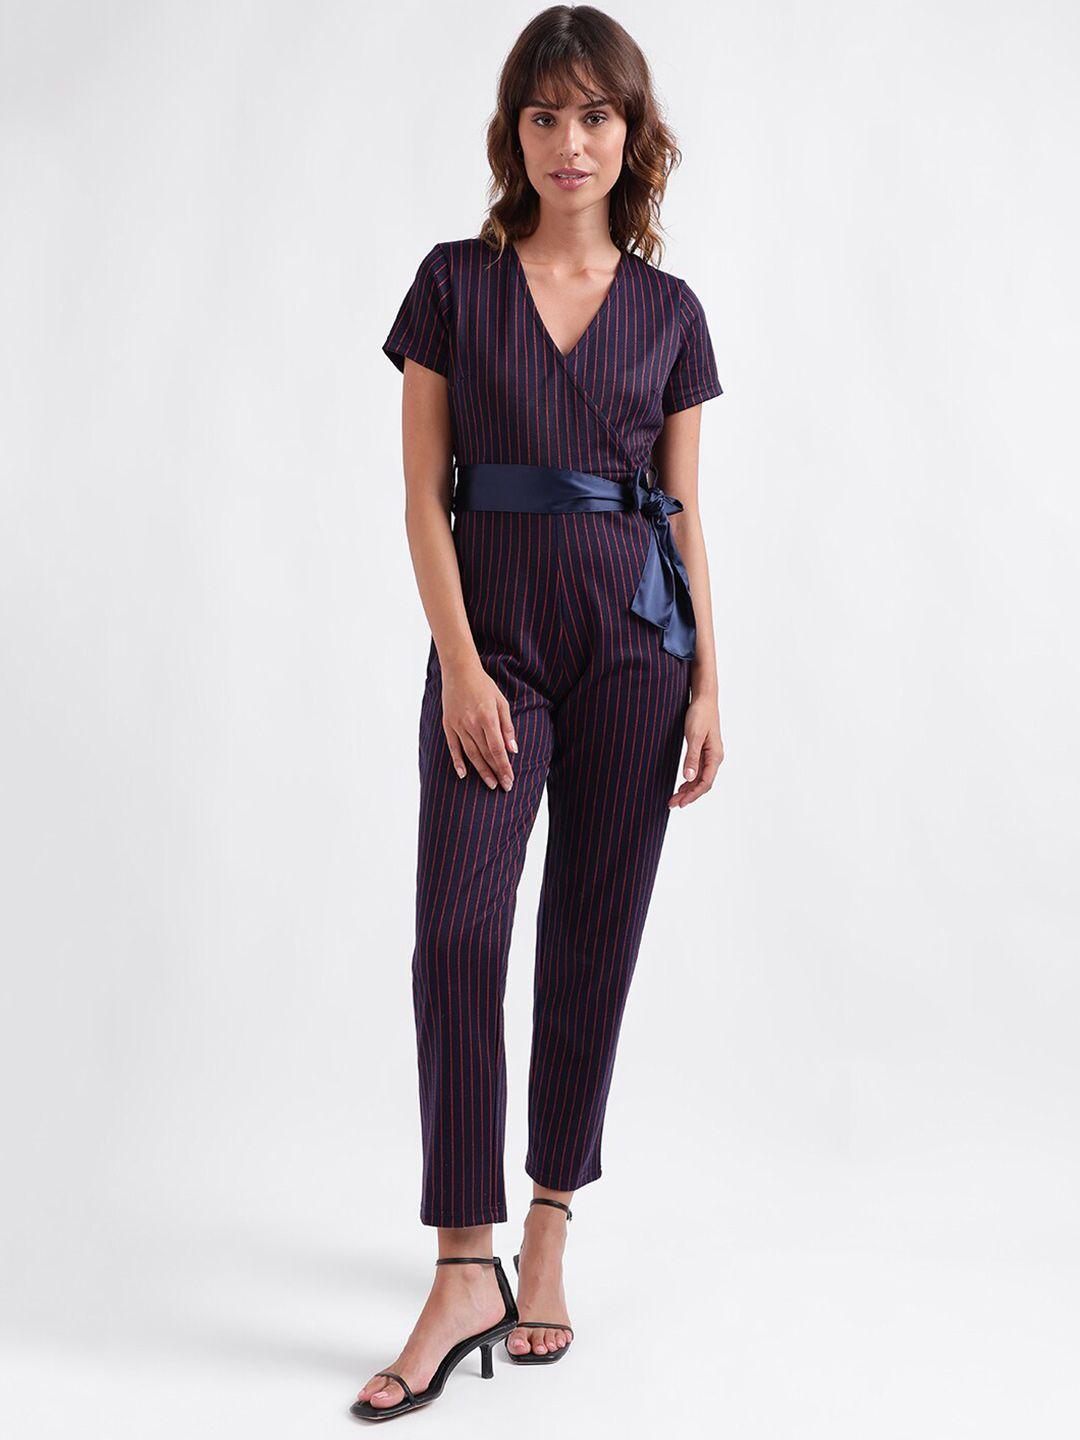 iconic-navy-blue-&-red-striped-v-neck-tie-up-basic-jumpsuit